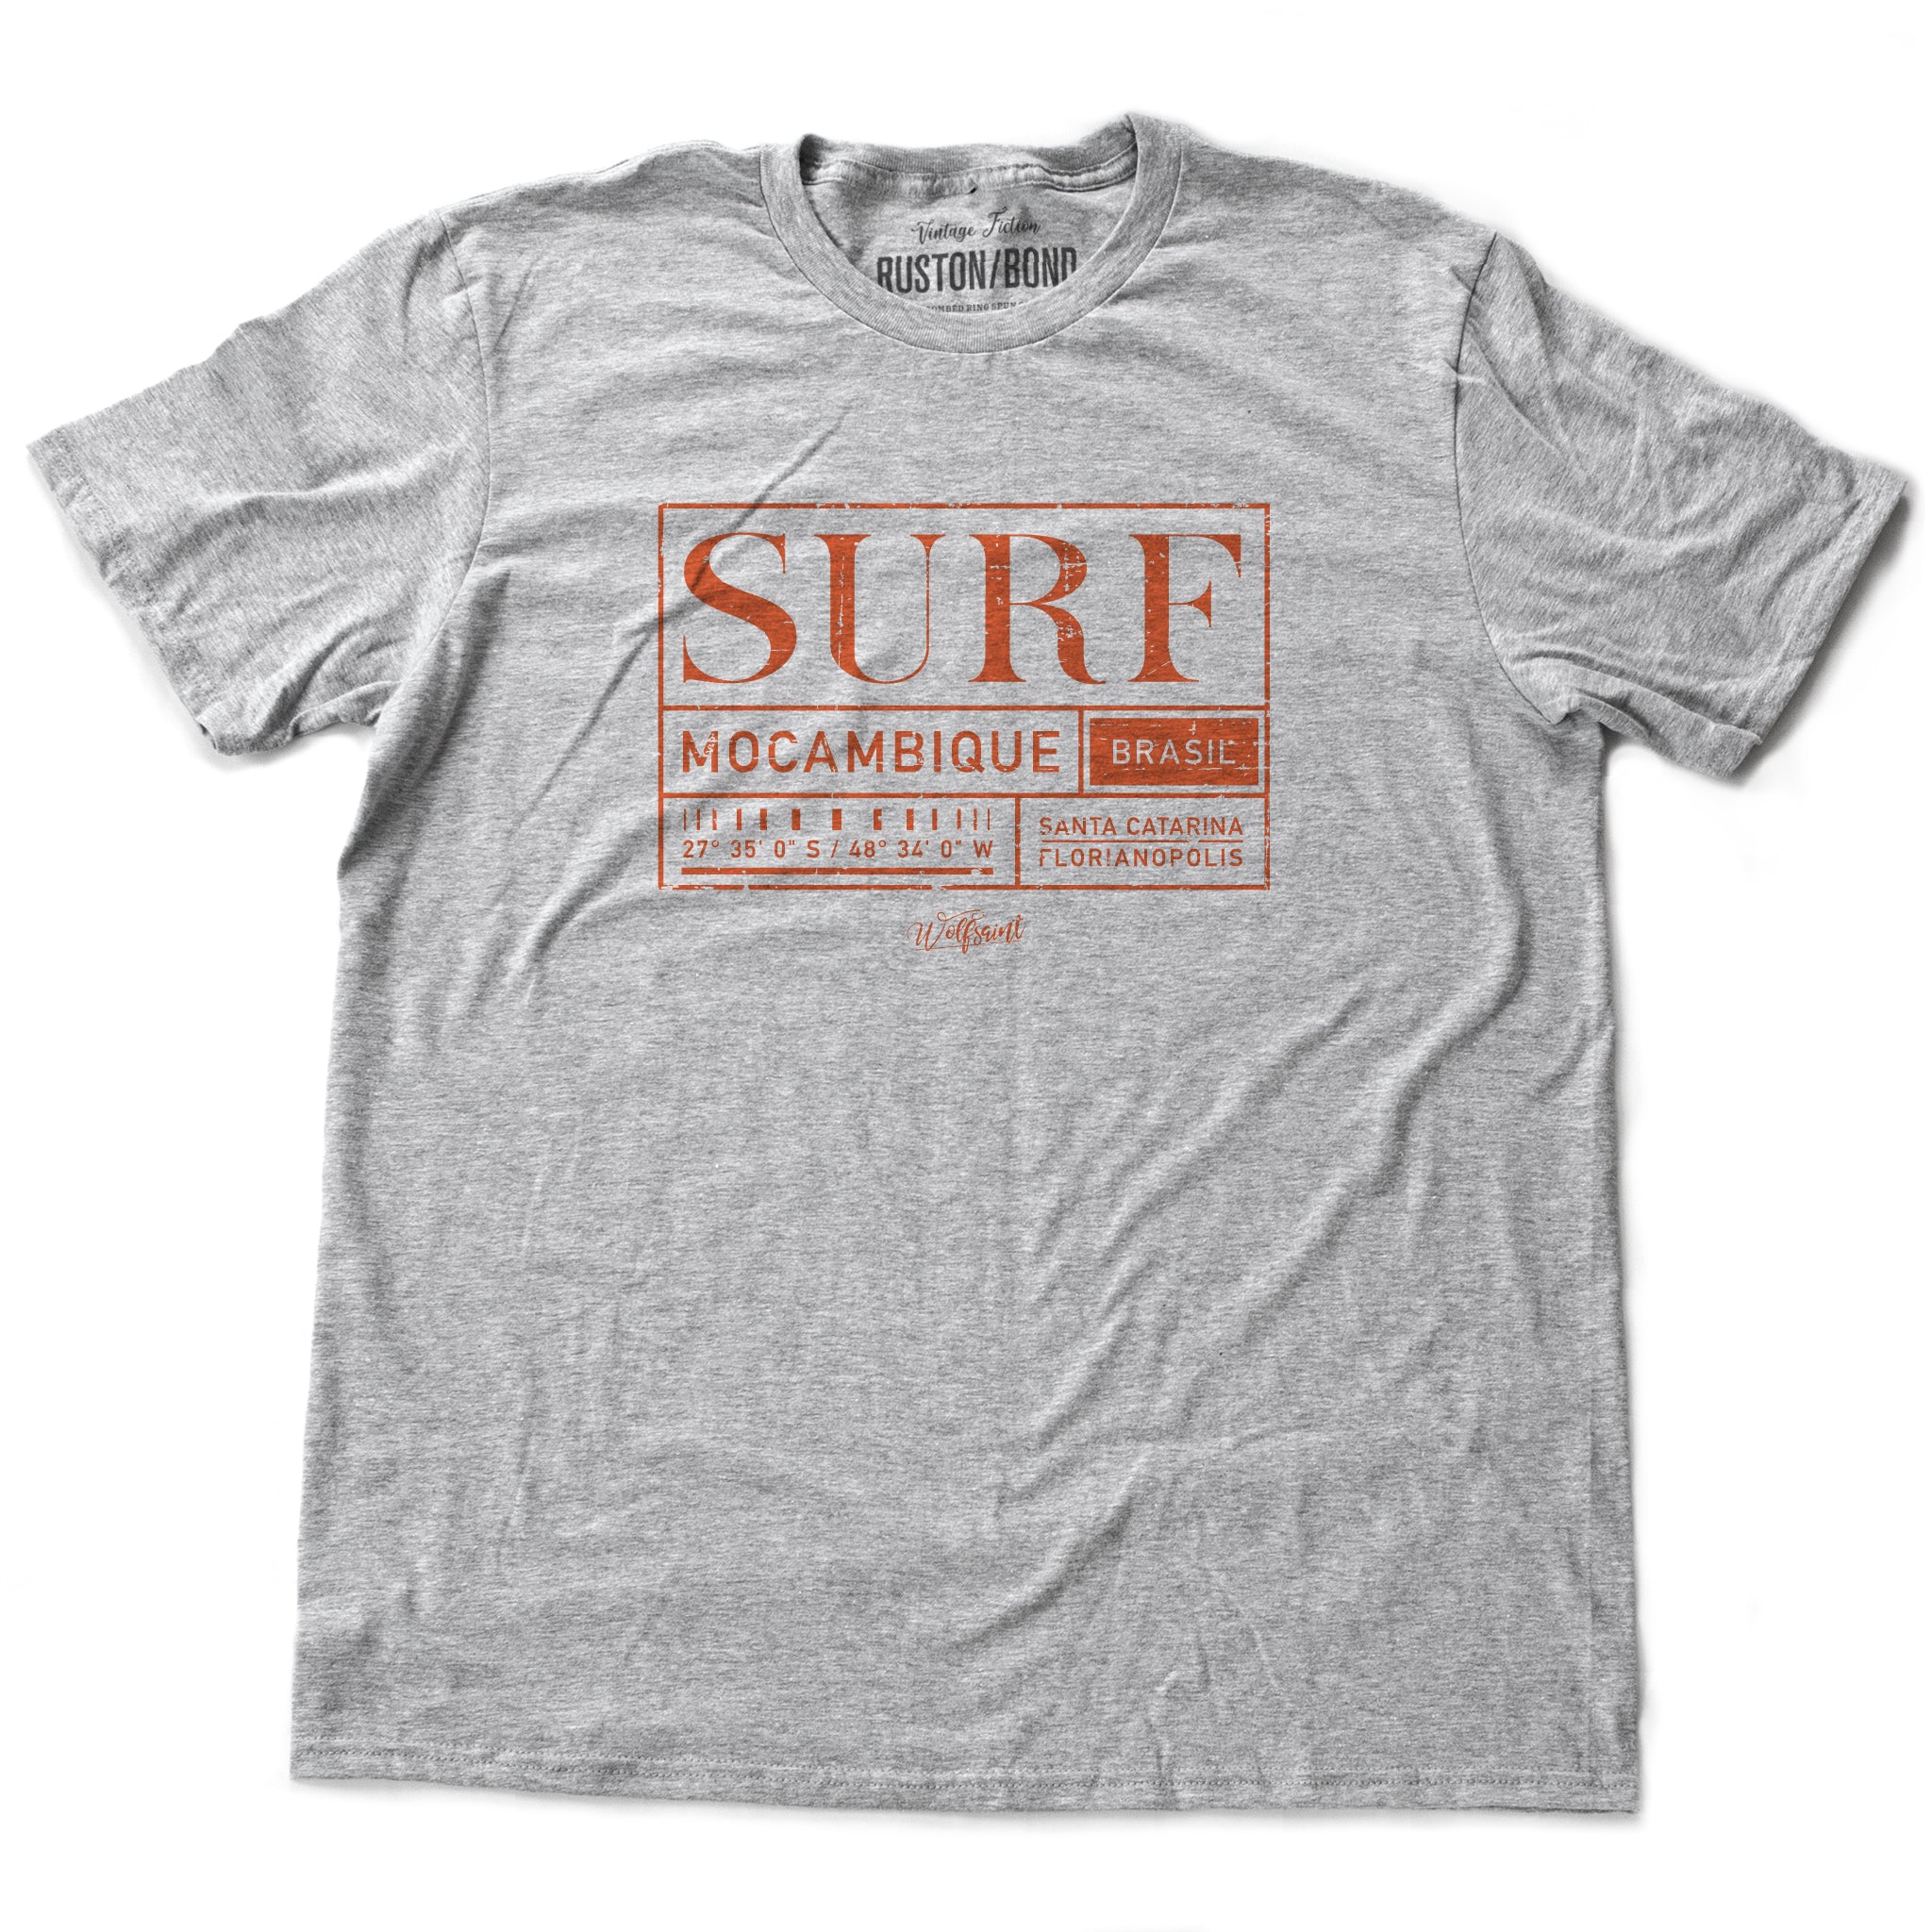 A fashionable graphic t-shirt promoting surfing tourism in Mocambique, Brazil, by fashion brand Wolfsaint.net